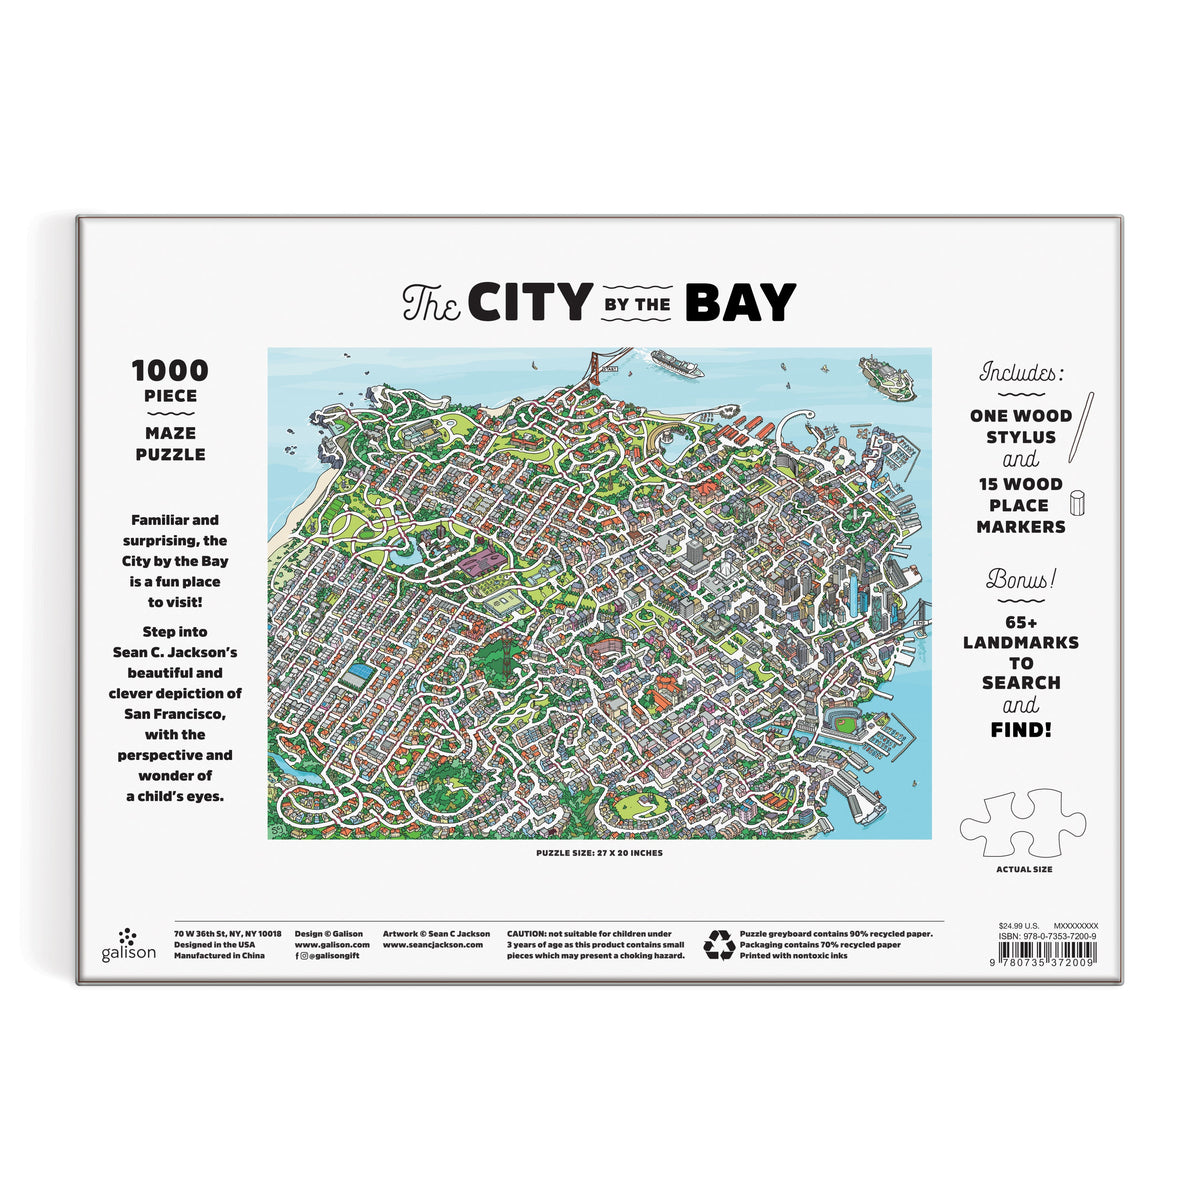 The City By the Bay 1000 Piece Maze Puzzle Galison 